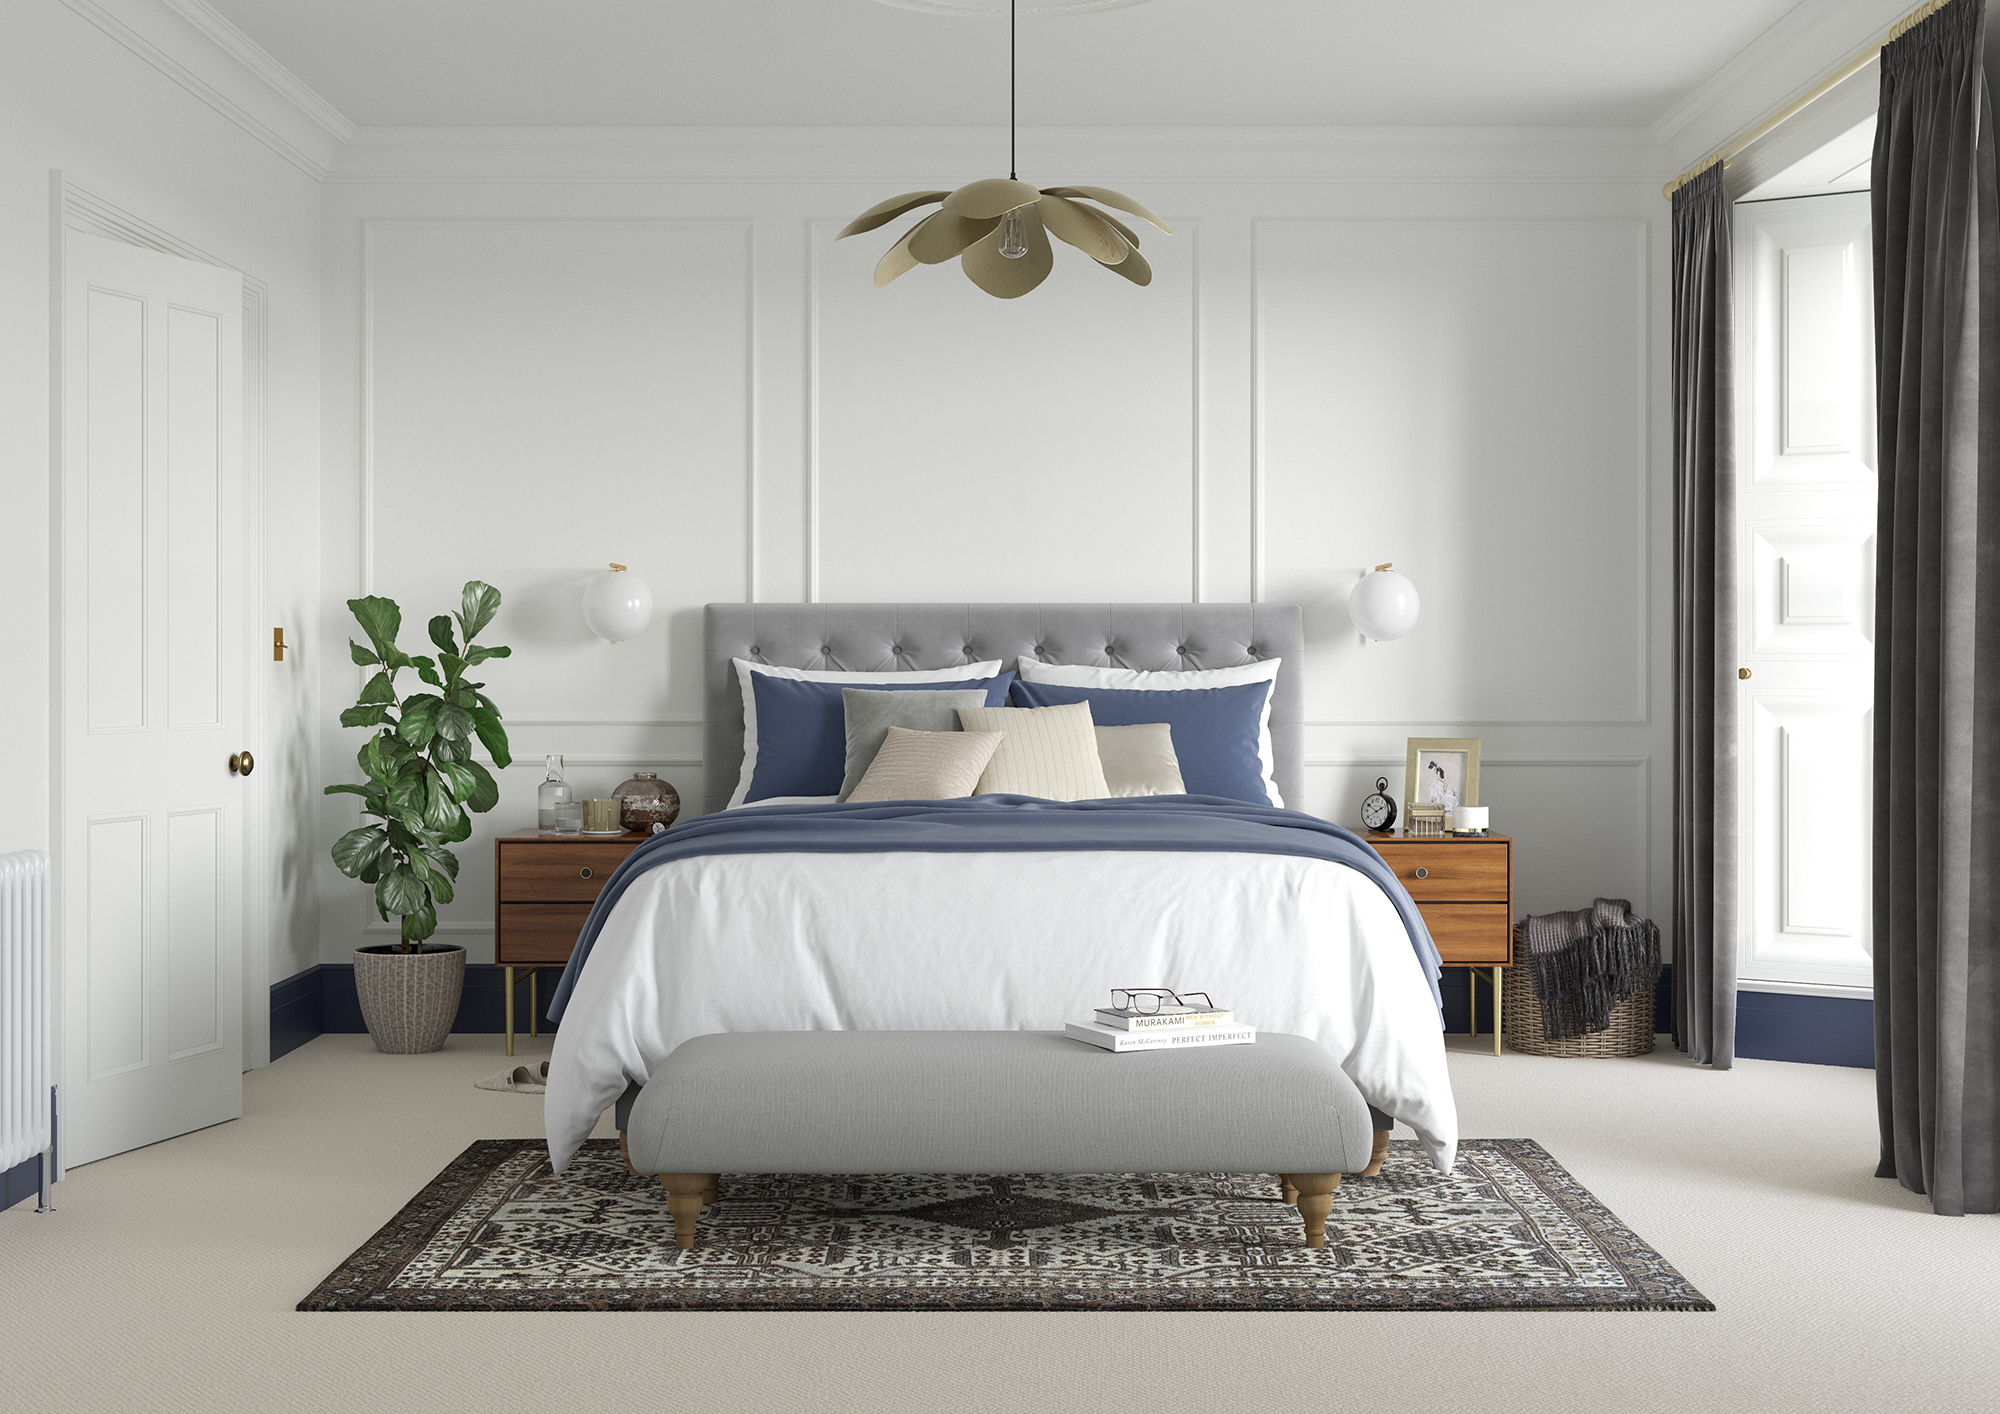 Bedroom   Wall   Indian White, Door   Indian White, Skirting   Dh Oxford Blue (heritage), Cornice   Indian White, Ceiling   Indian White